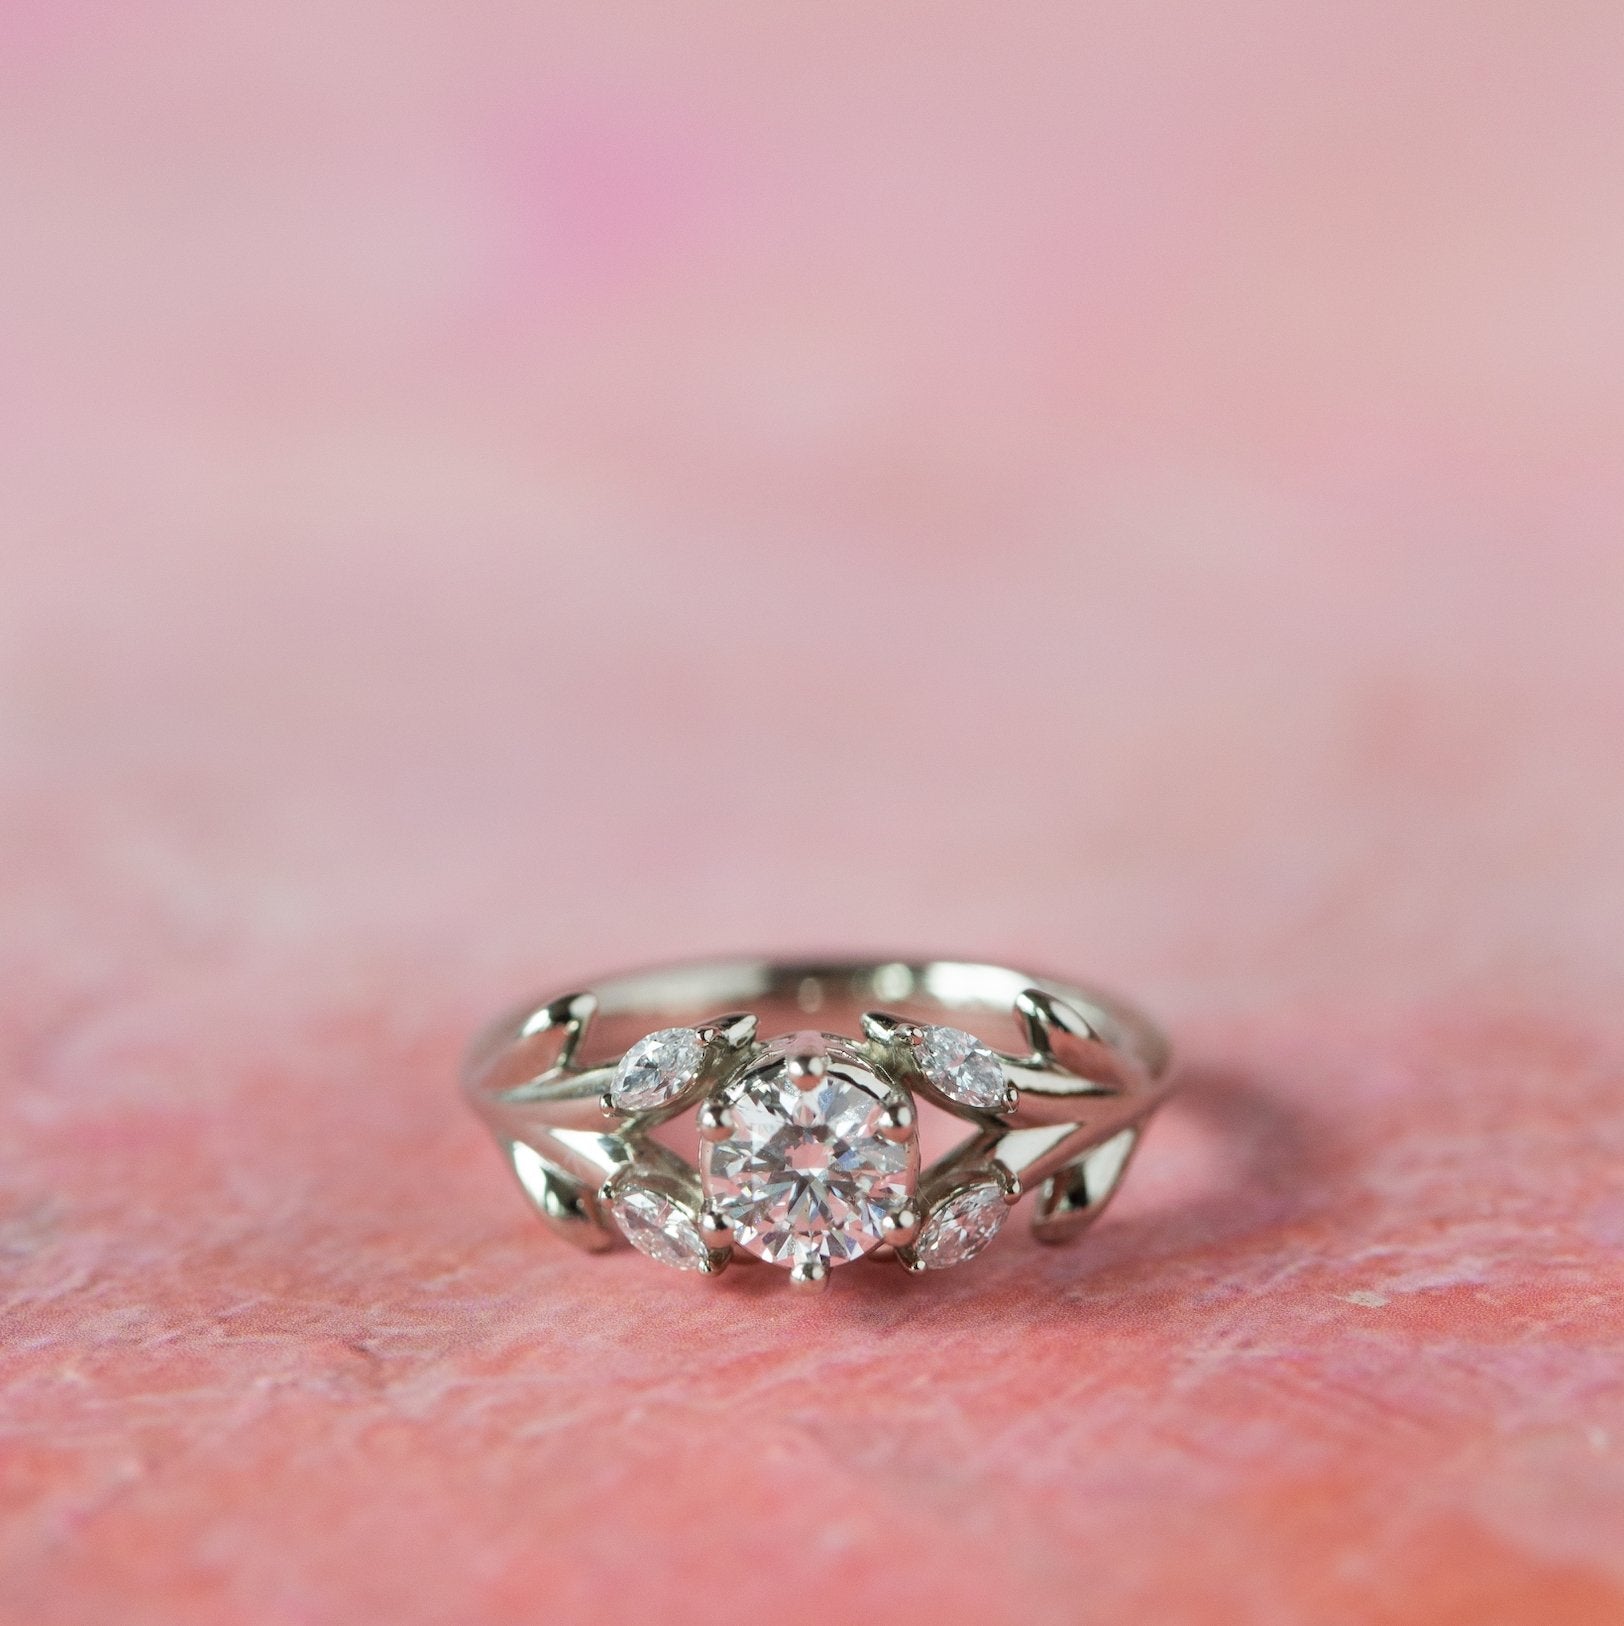 The Diamond Olive Branch Ring